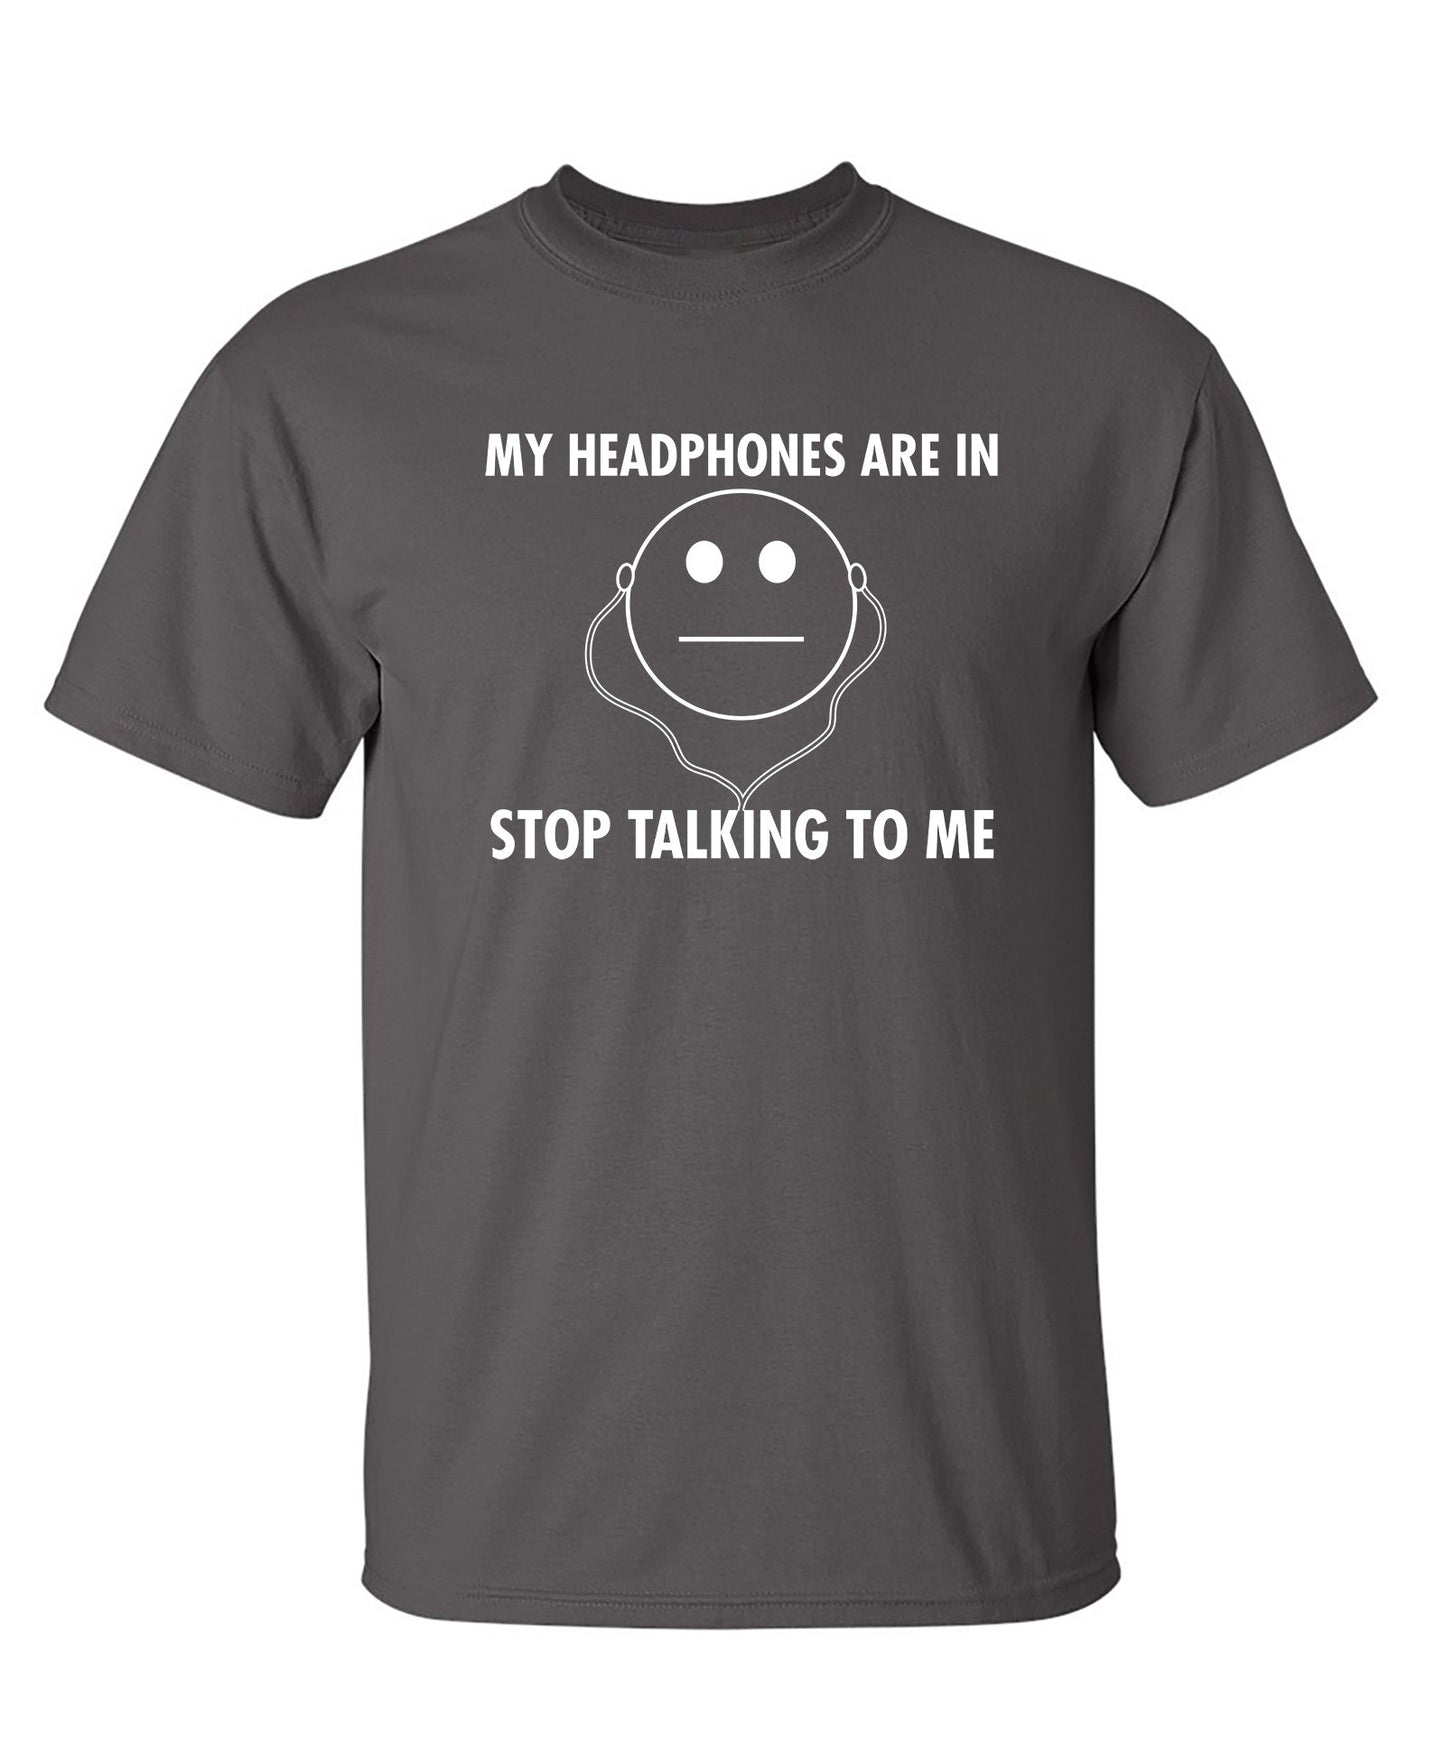 My Headphones are In Stop Talking - Funny T Shirts & Graphic Tees